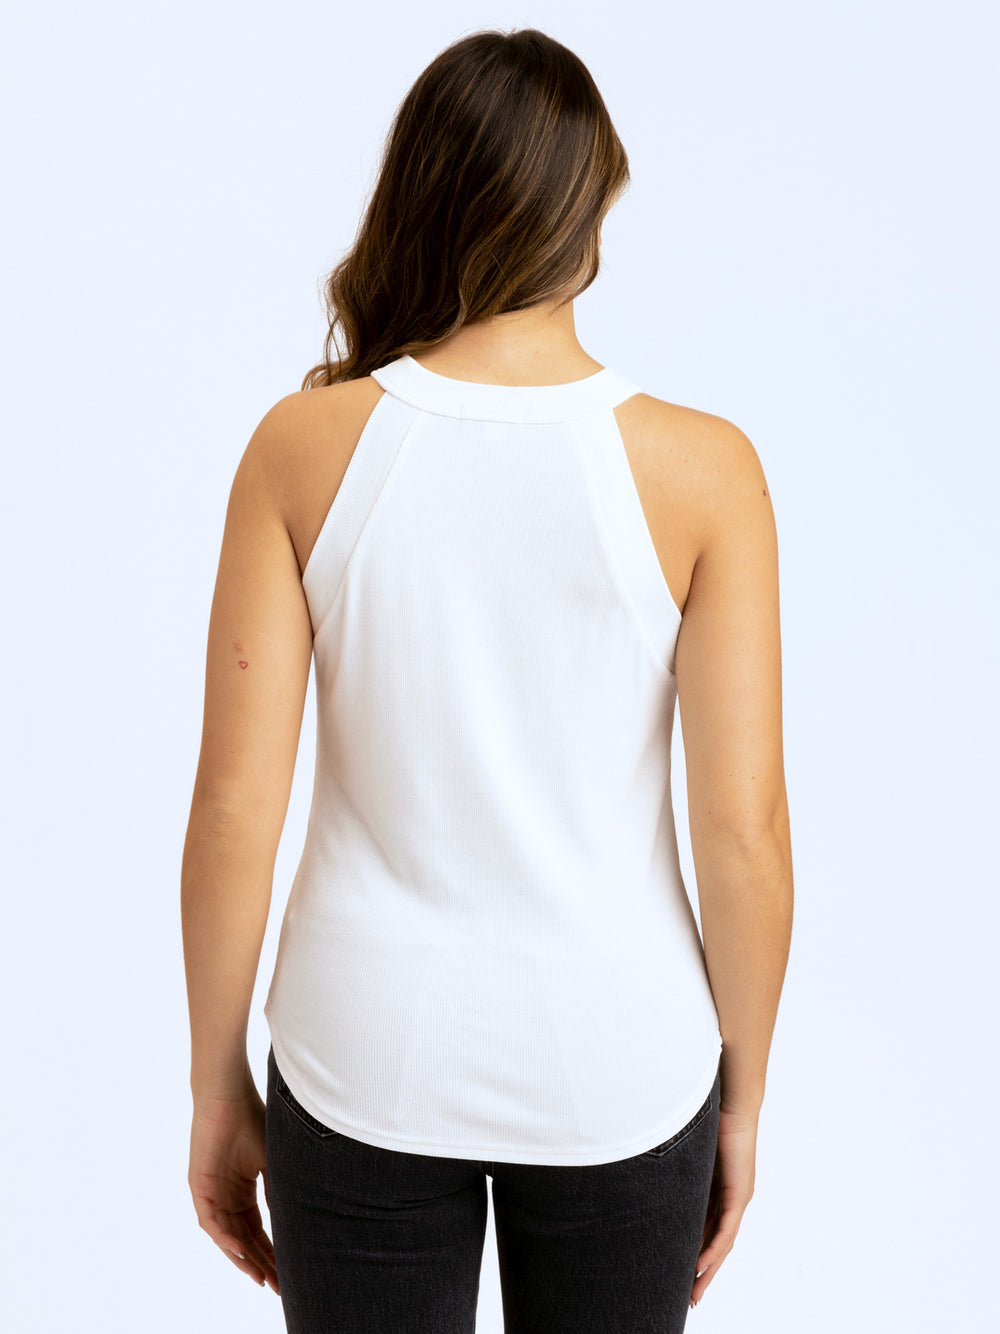 Threads 4 Thought tank, Maresia feather rib (2 colors)